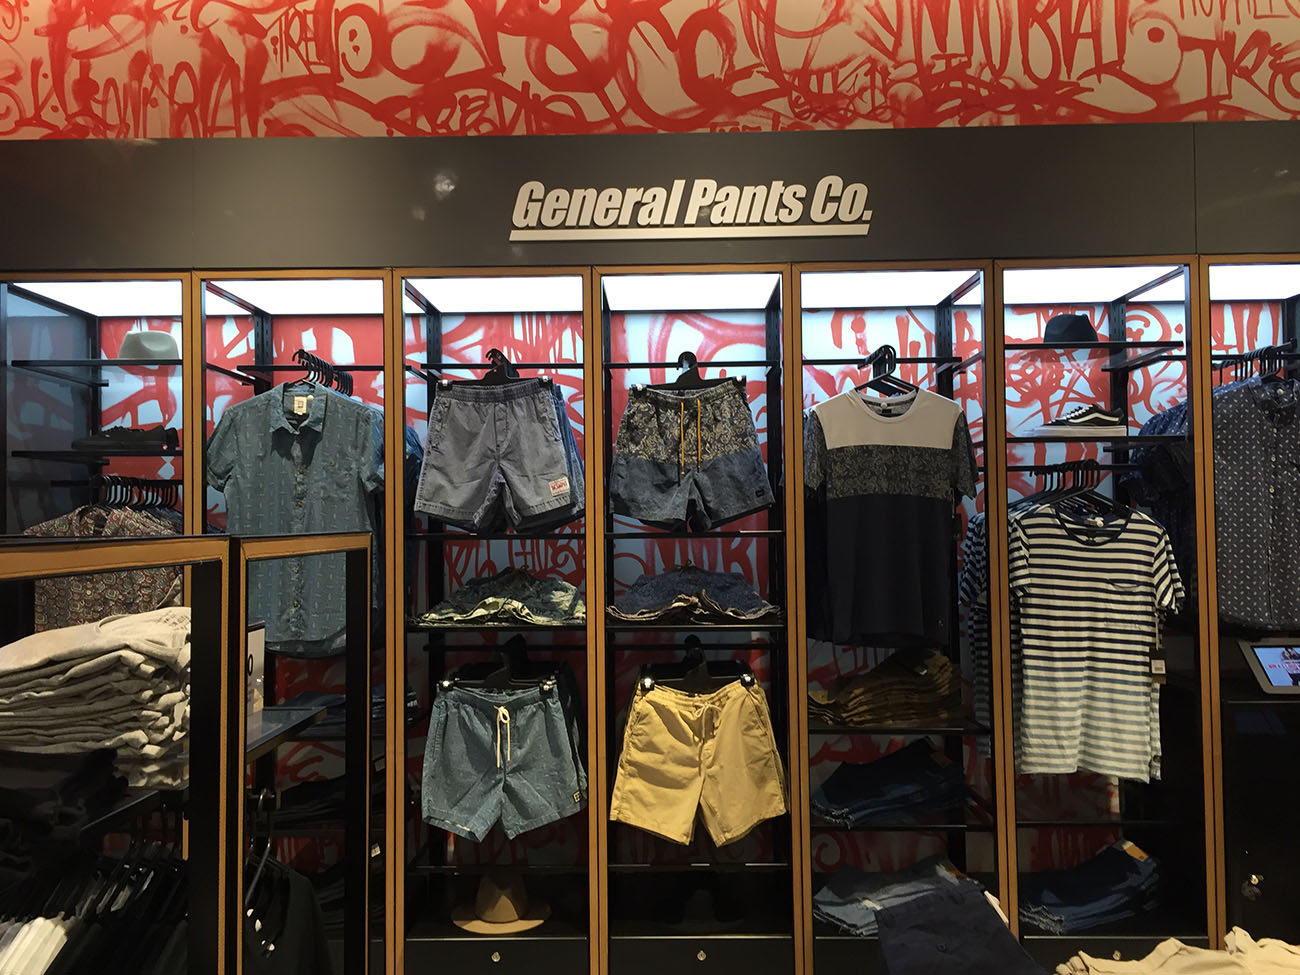 Clothes in a store with graffiti wall behind